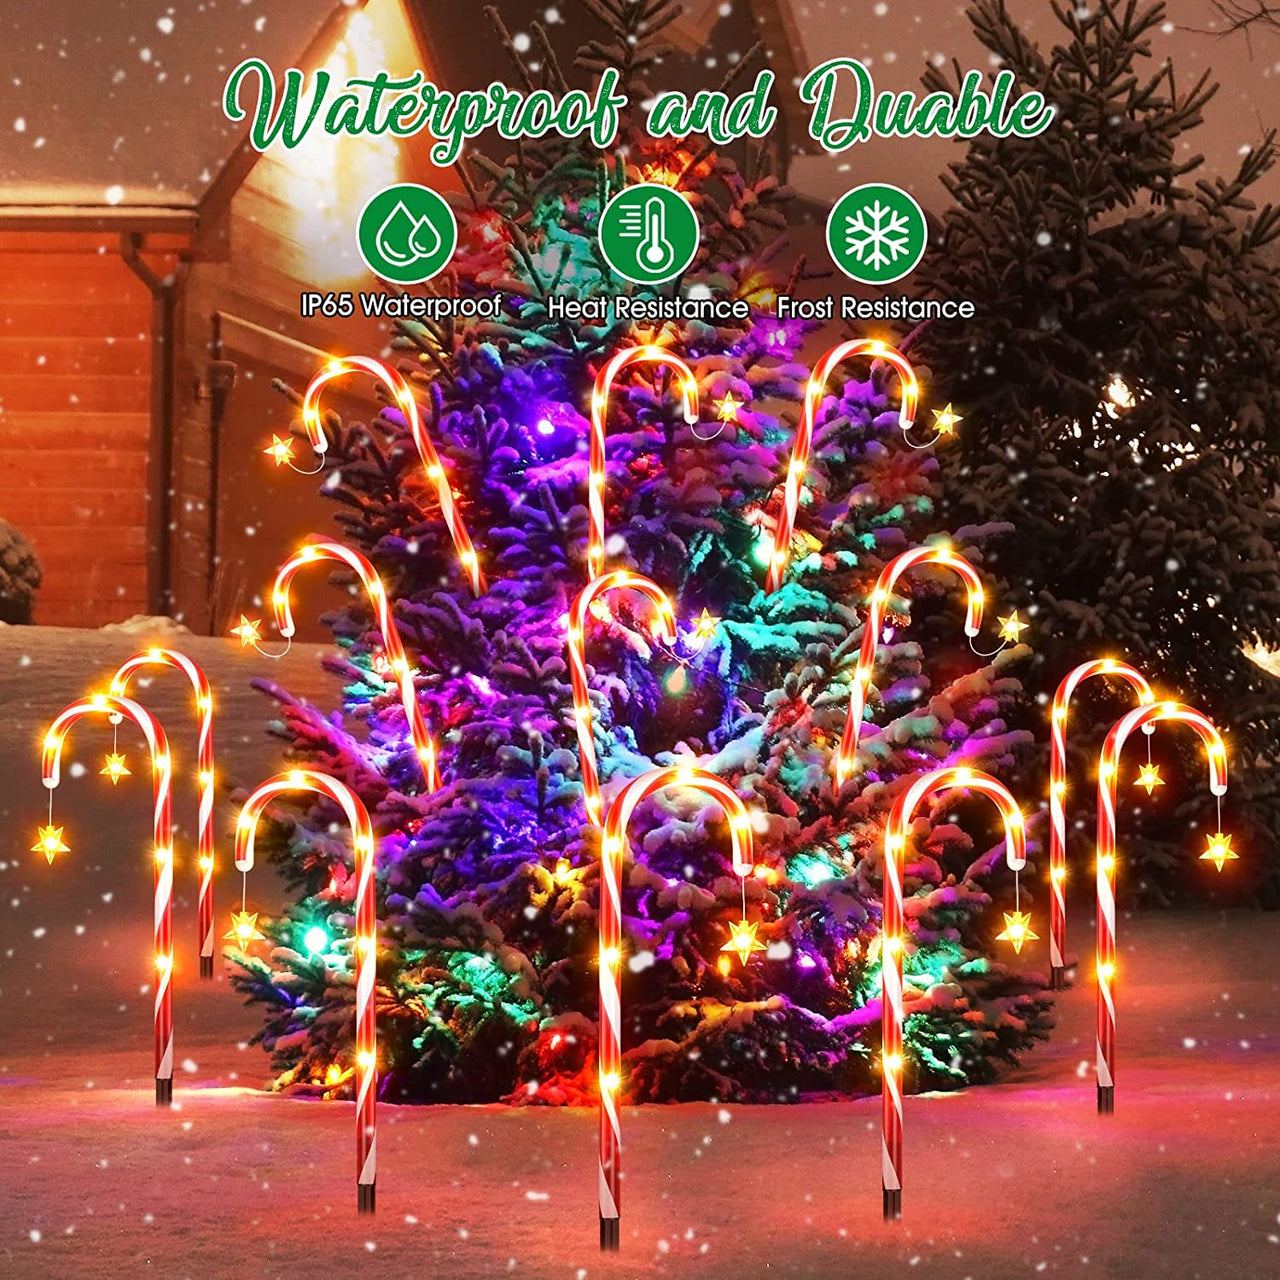 12 Pack Outdoor Christmas Decorations Solar Candy Cane Lights, LETMY Brighter & Taller Solar Christmas Pathway Lights with Remote Control, 9 Modes Christmas Decorations for Outdoor Yard Xmas Holiday